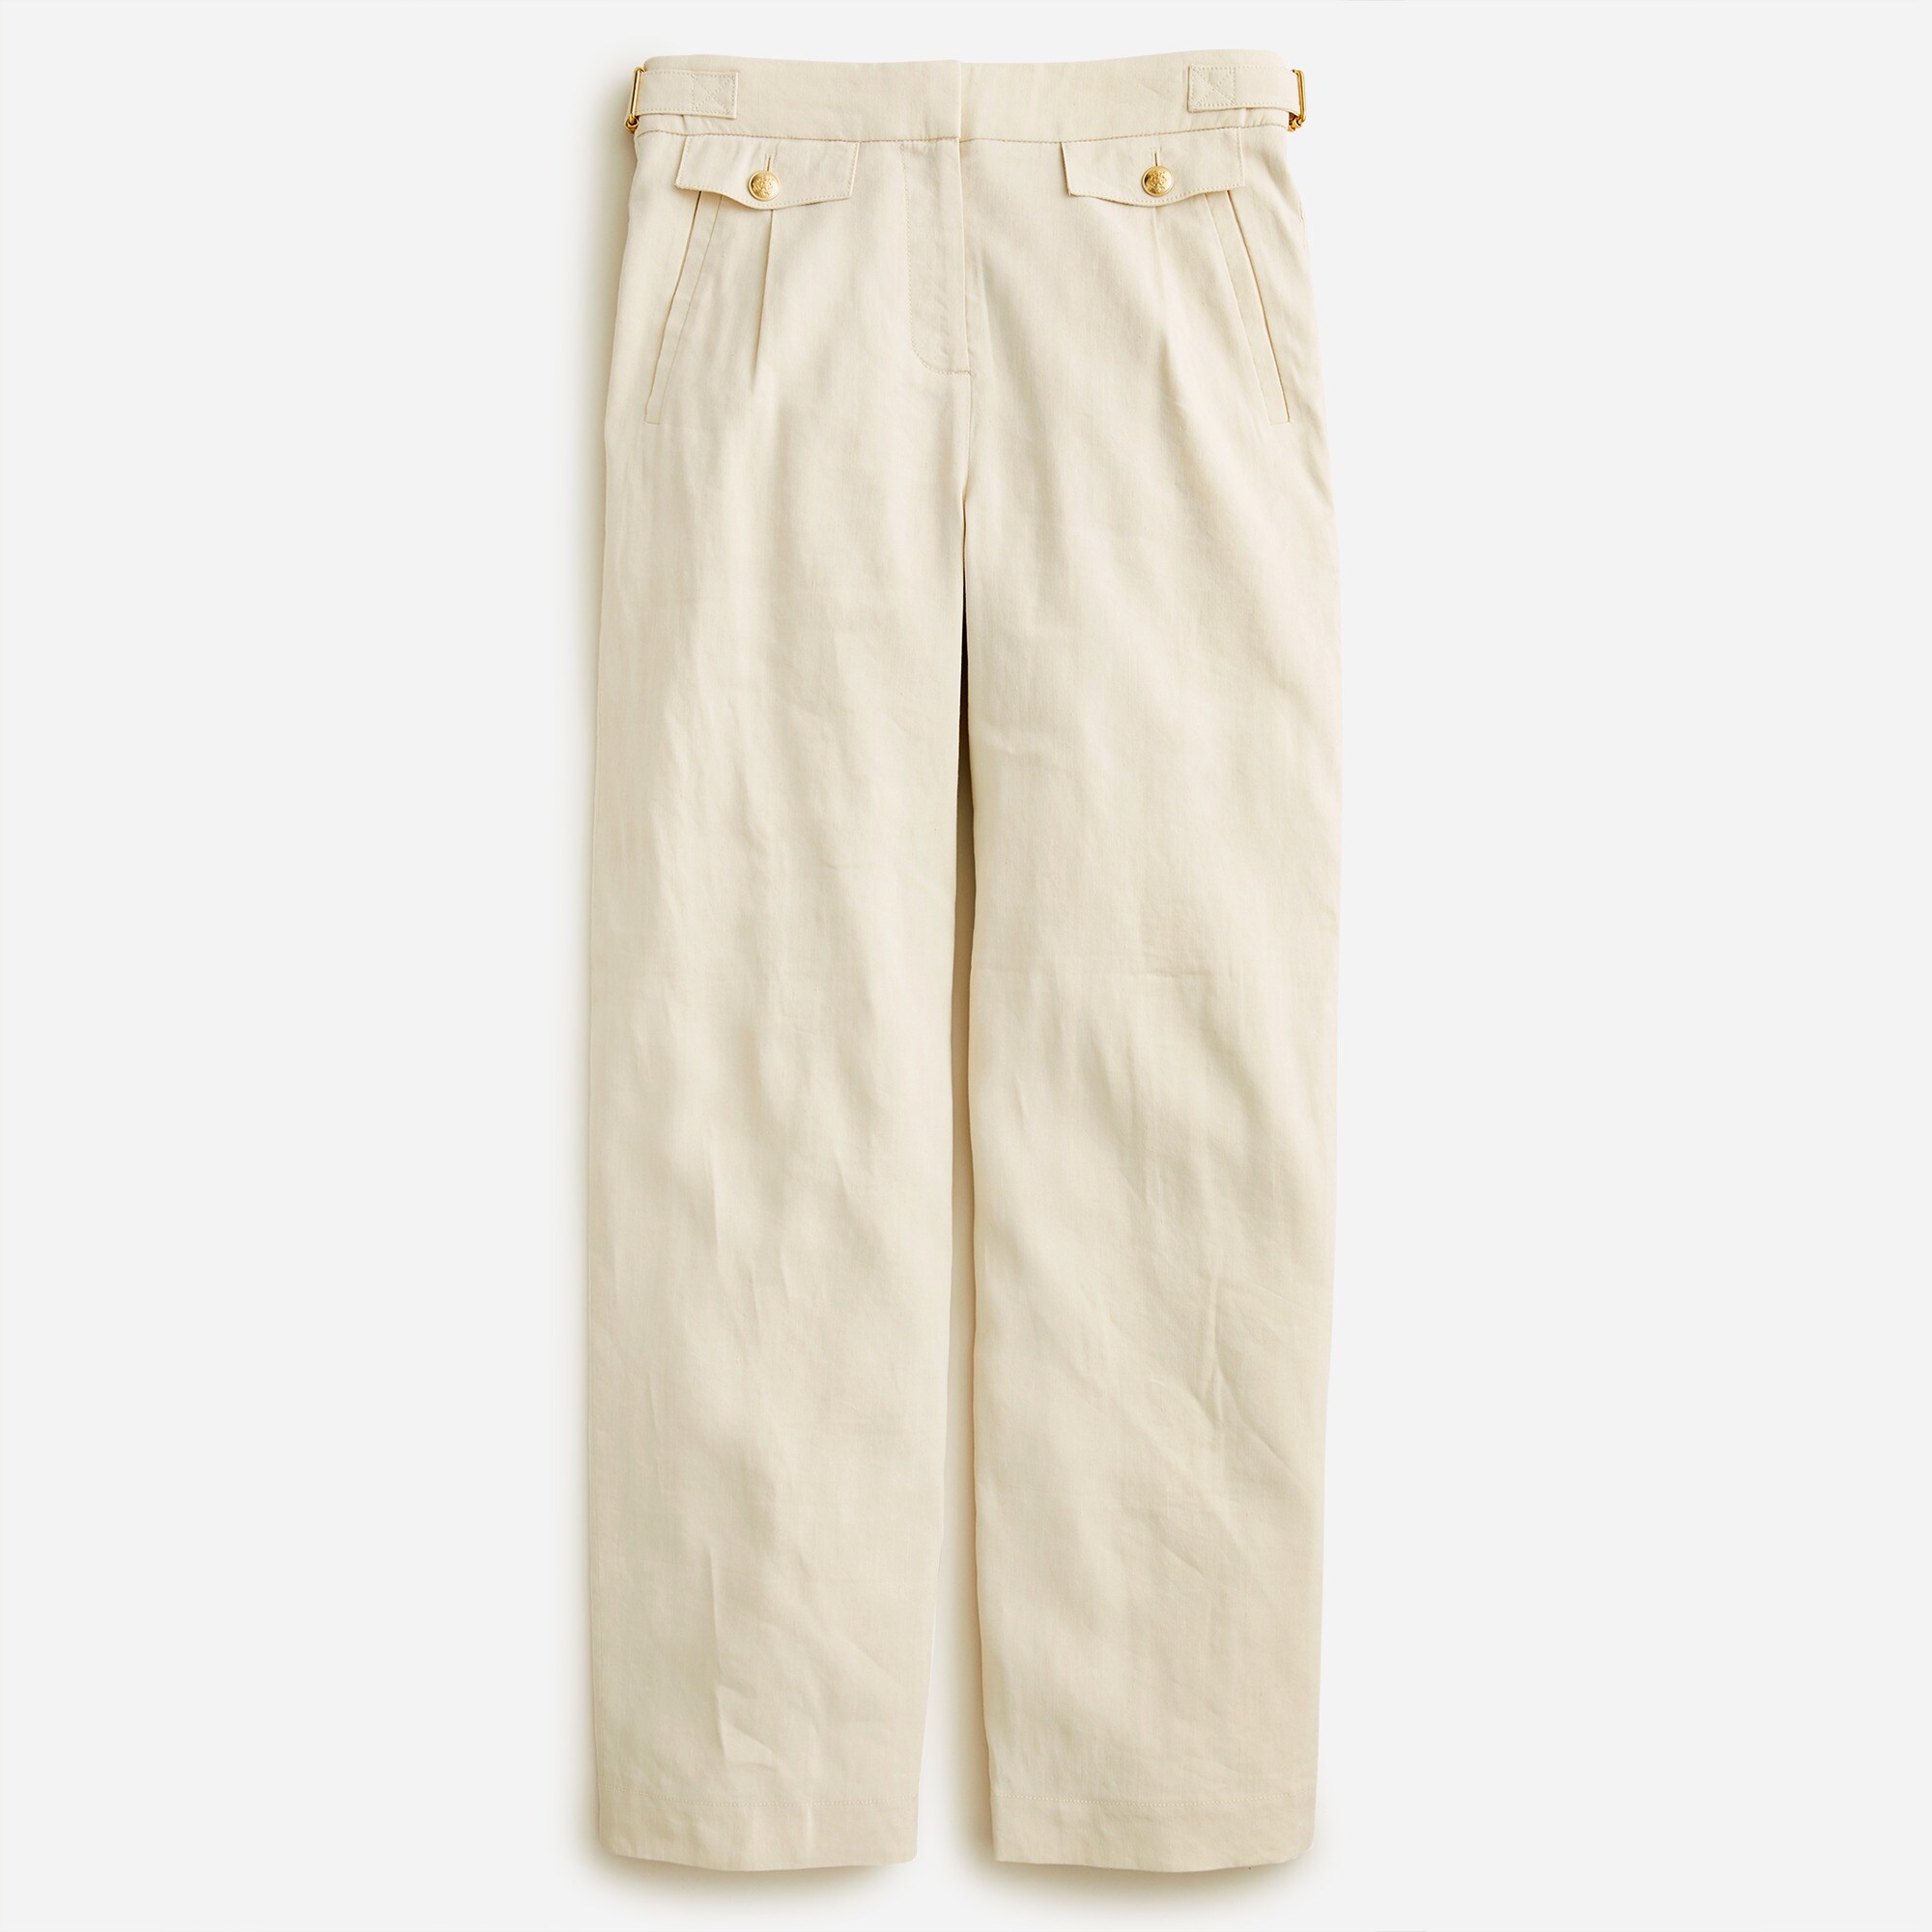  Petite Collection side-tab trouser in Italian linen blend